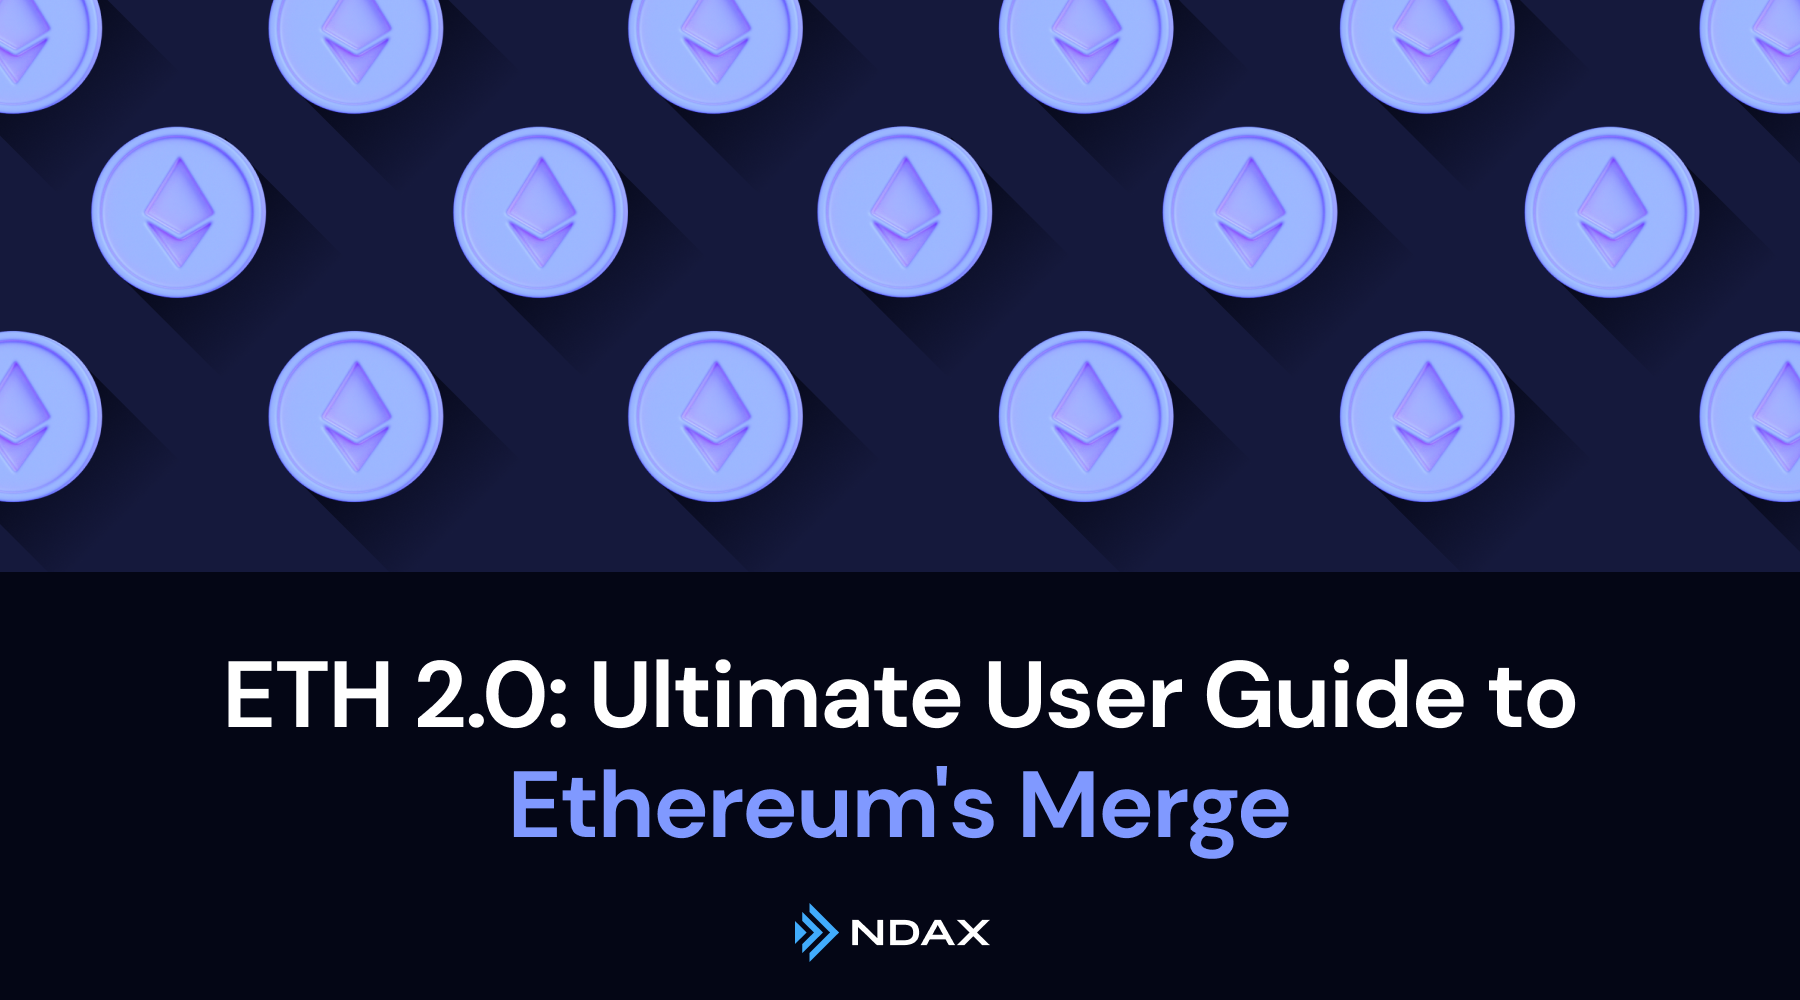 ETH 2.0: Ultimate User Guide to Ethereum's Merge